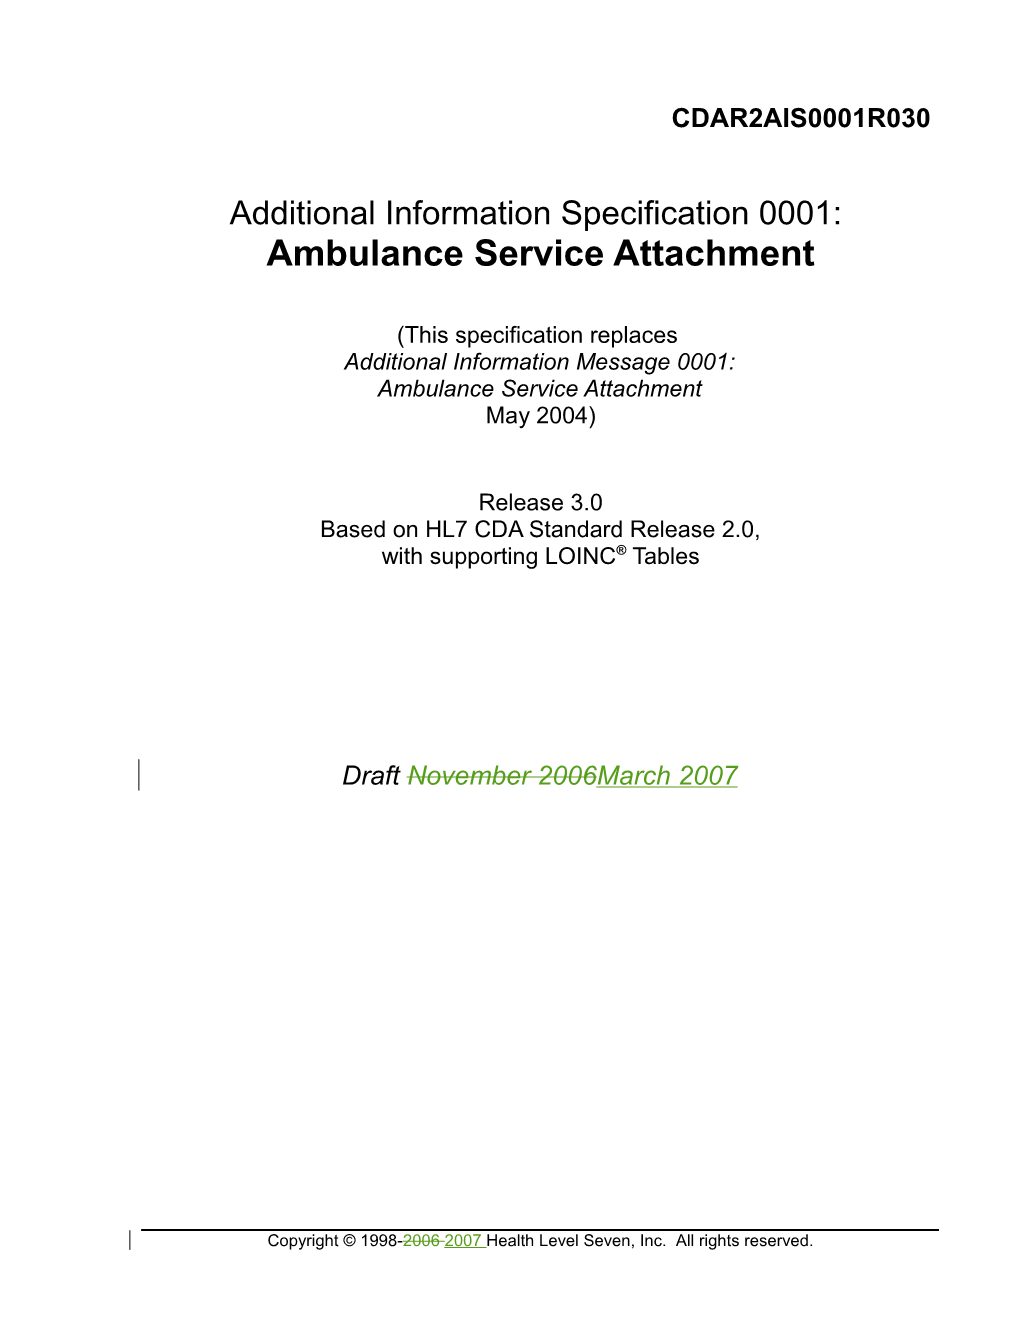 Additional Information Specification 0001